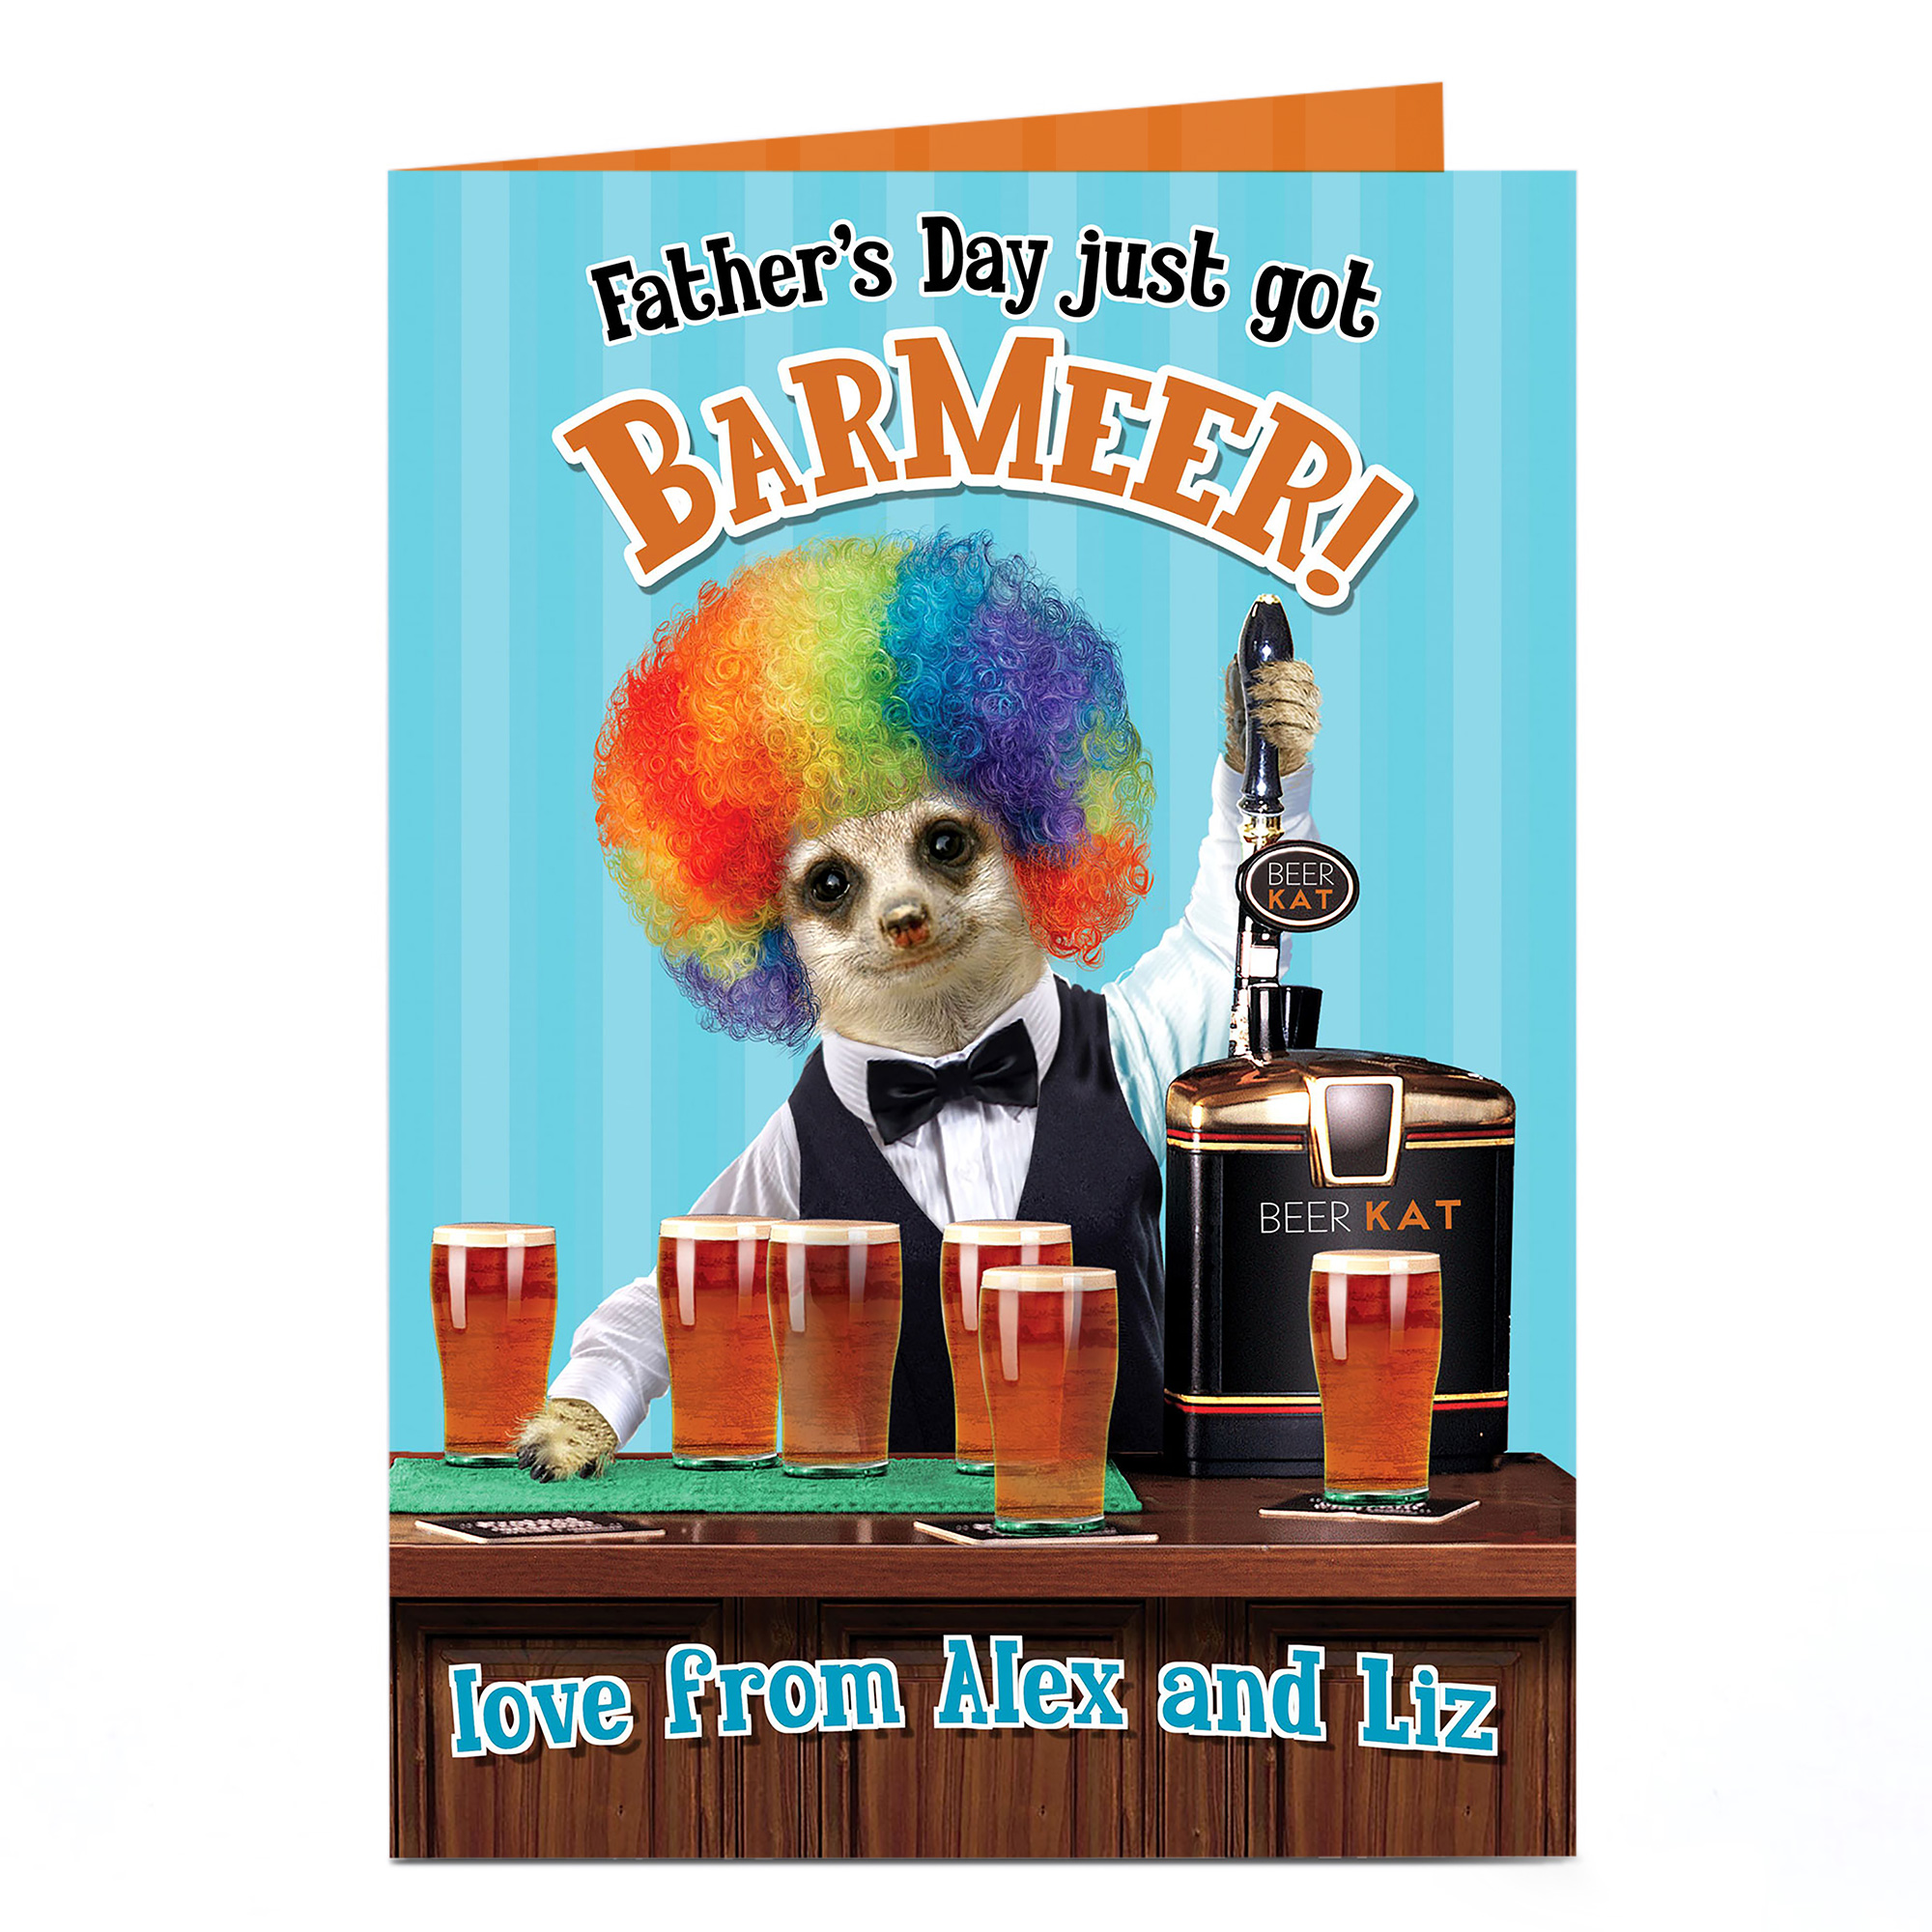 Personalised Father's Day Card - BARMEER!